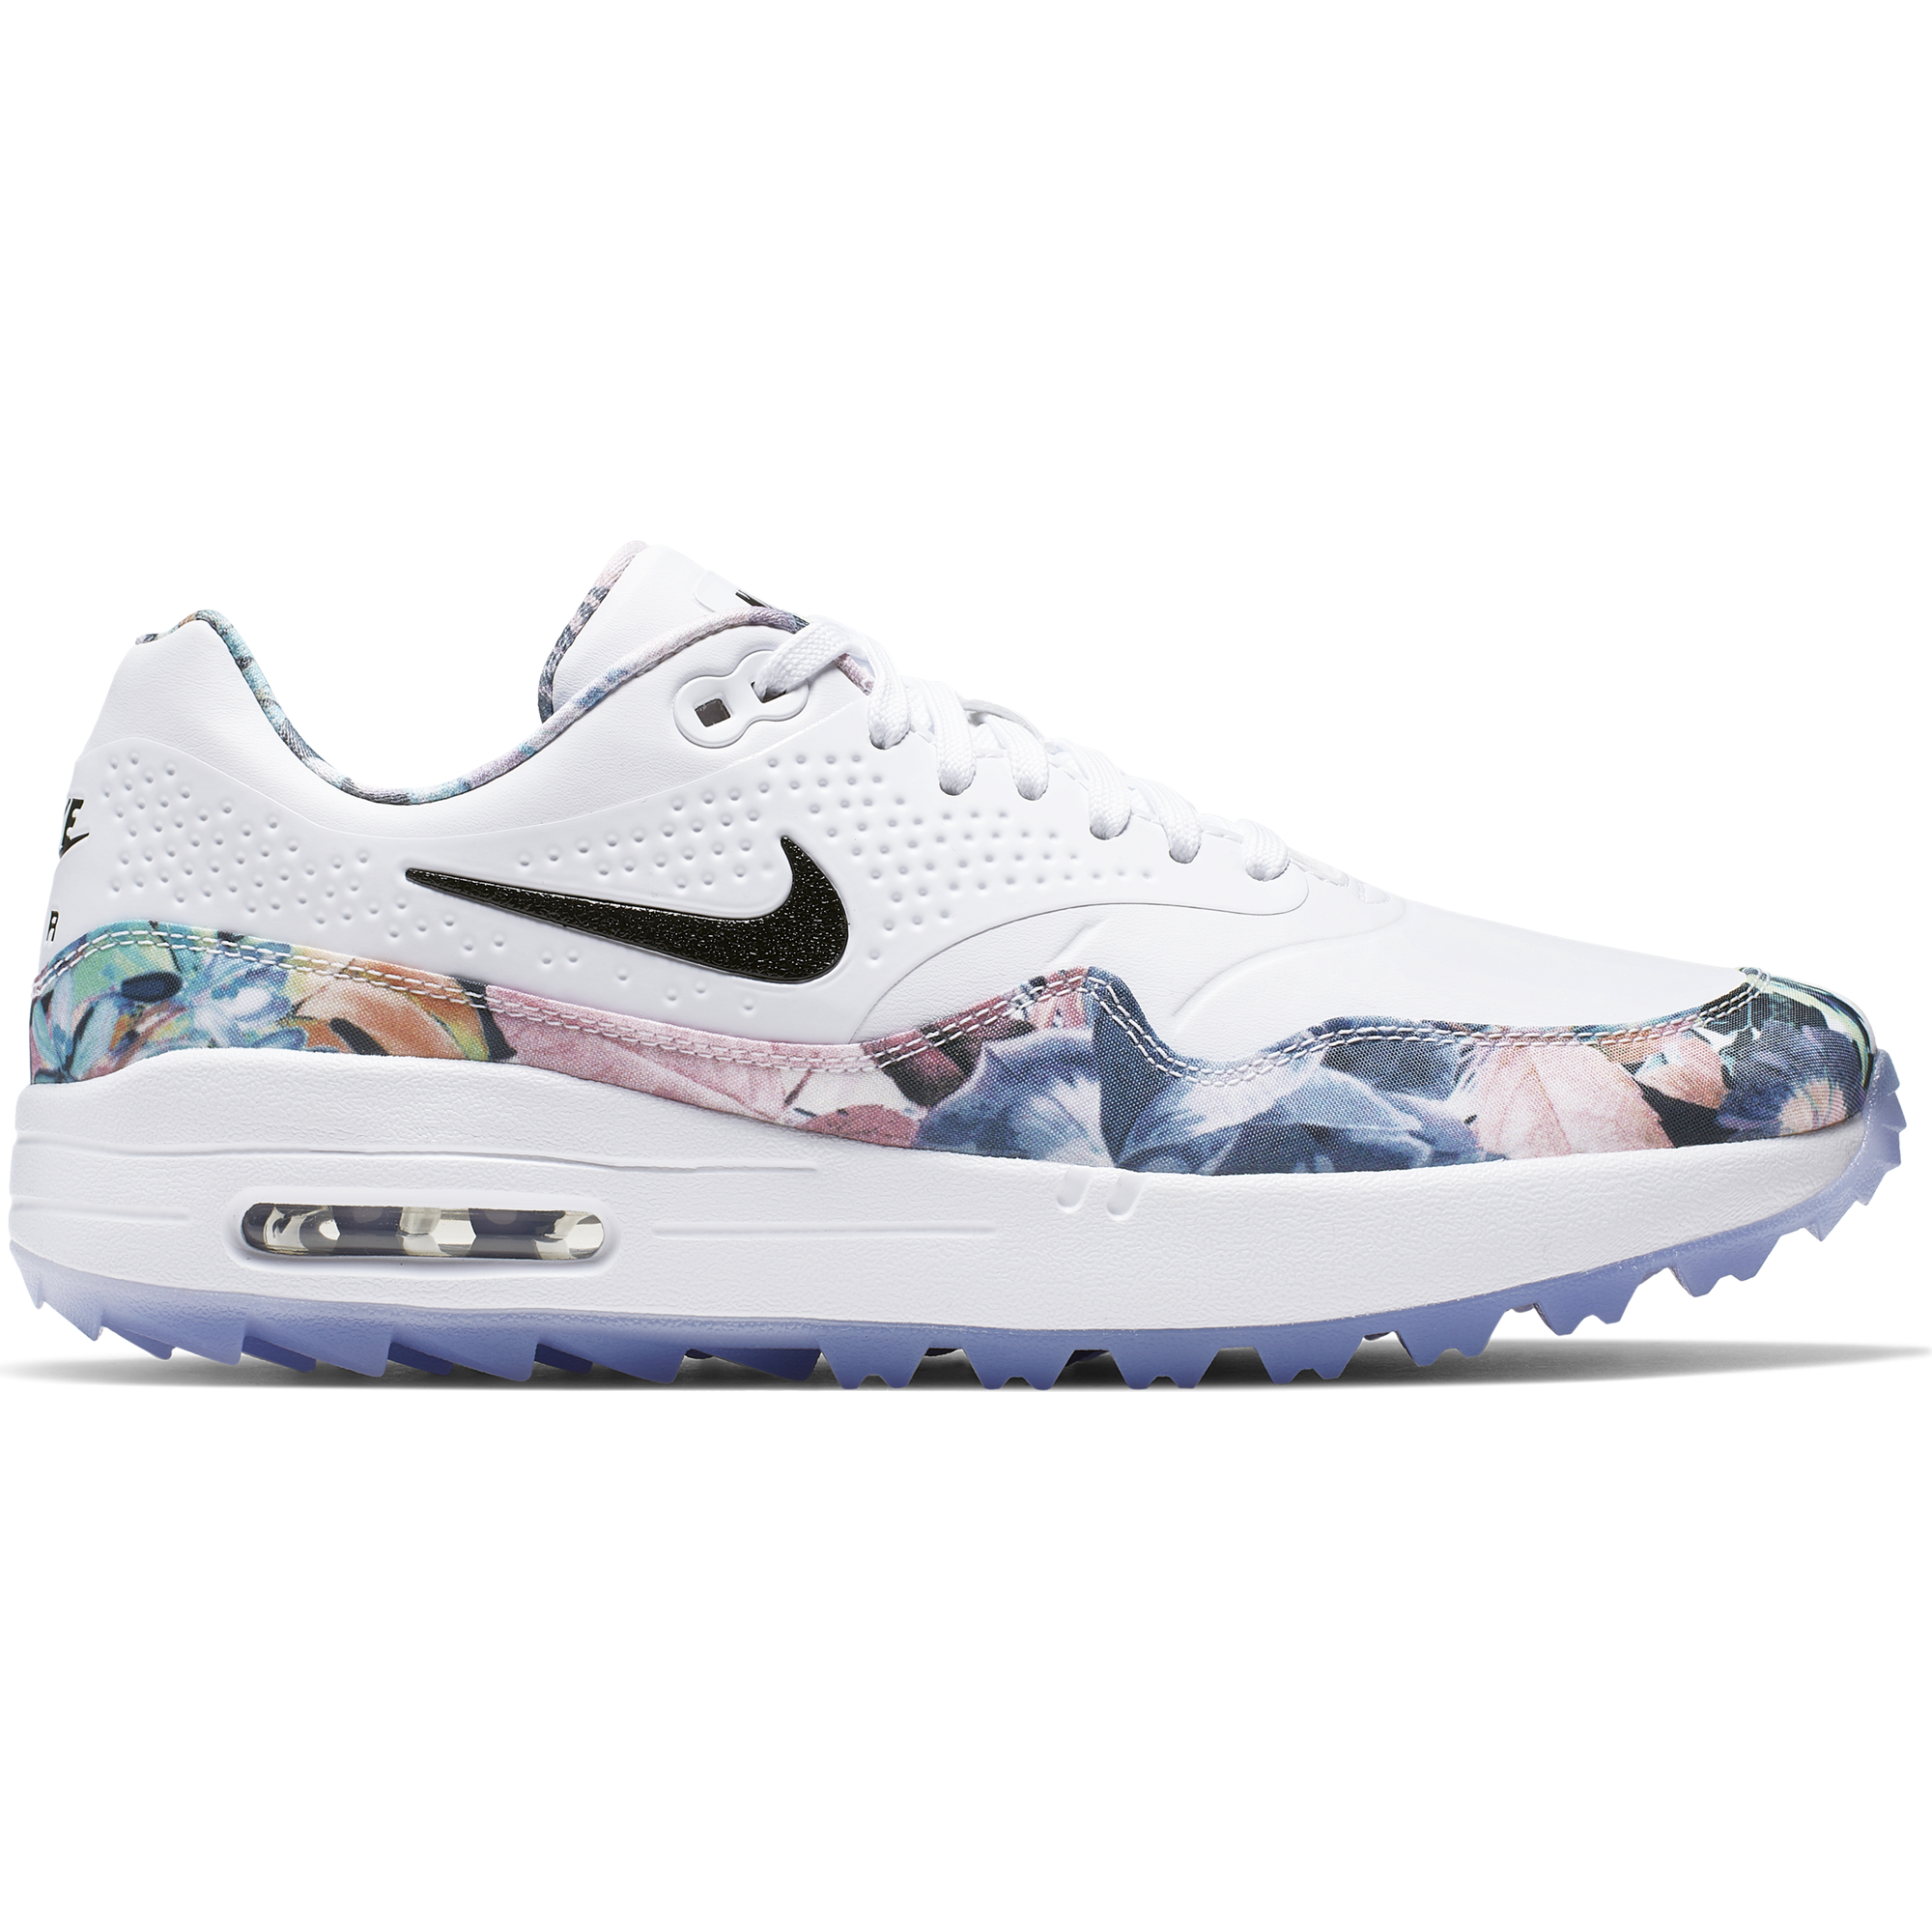 nike women's shoes floral